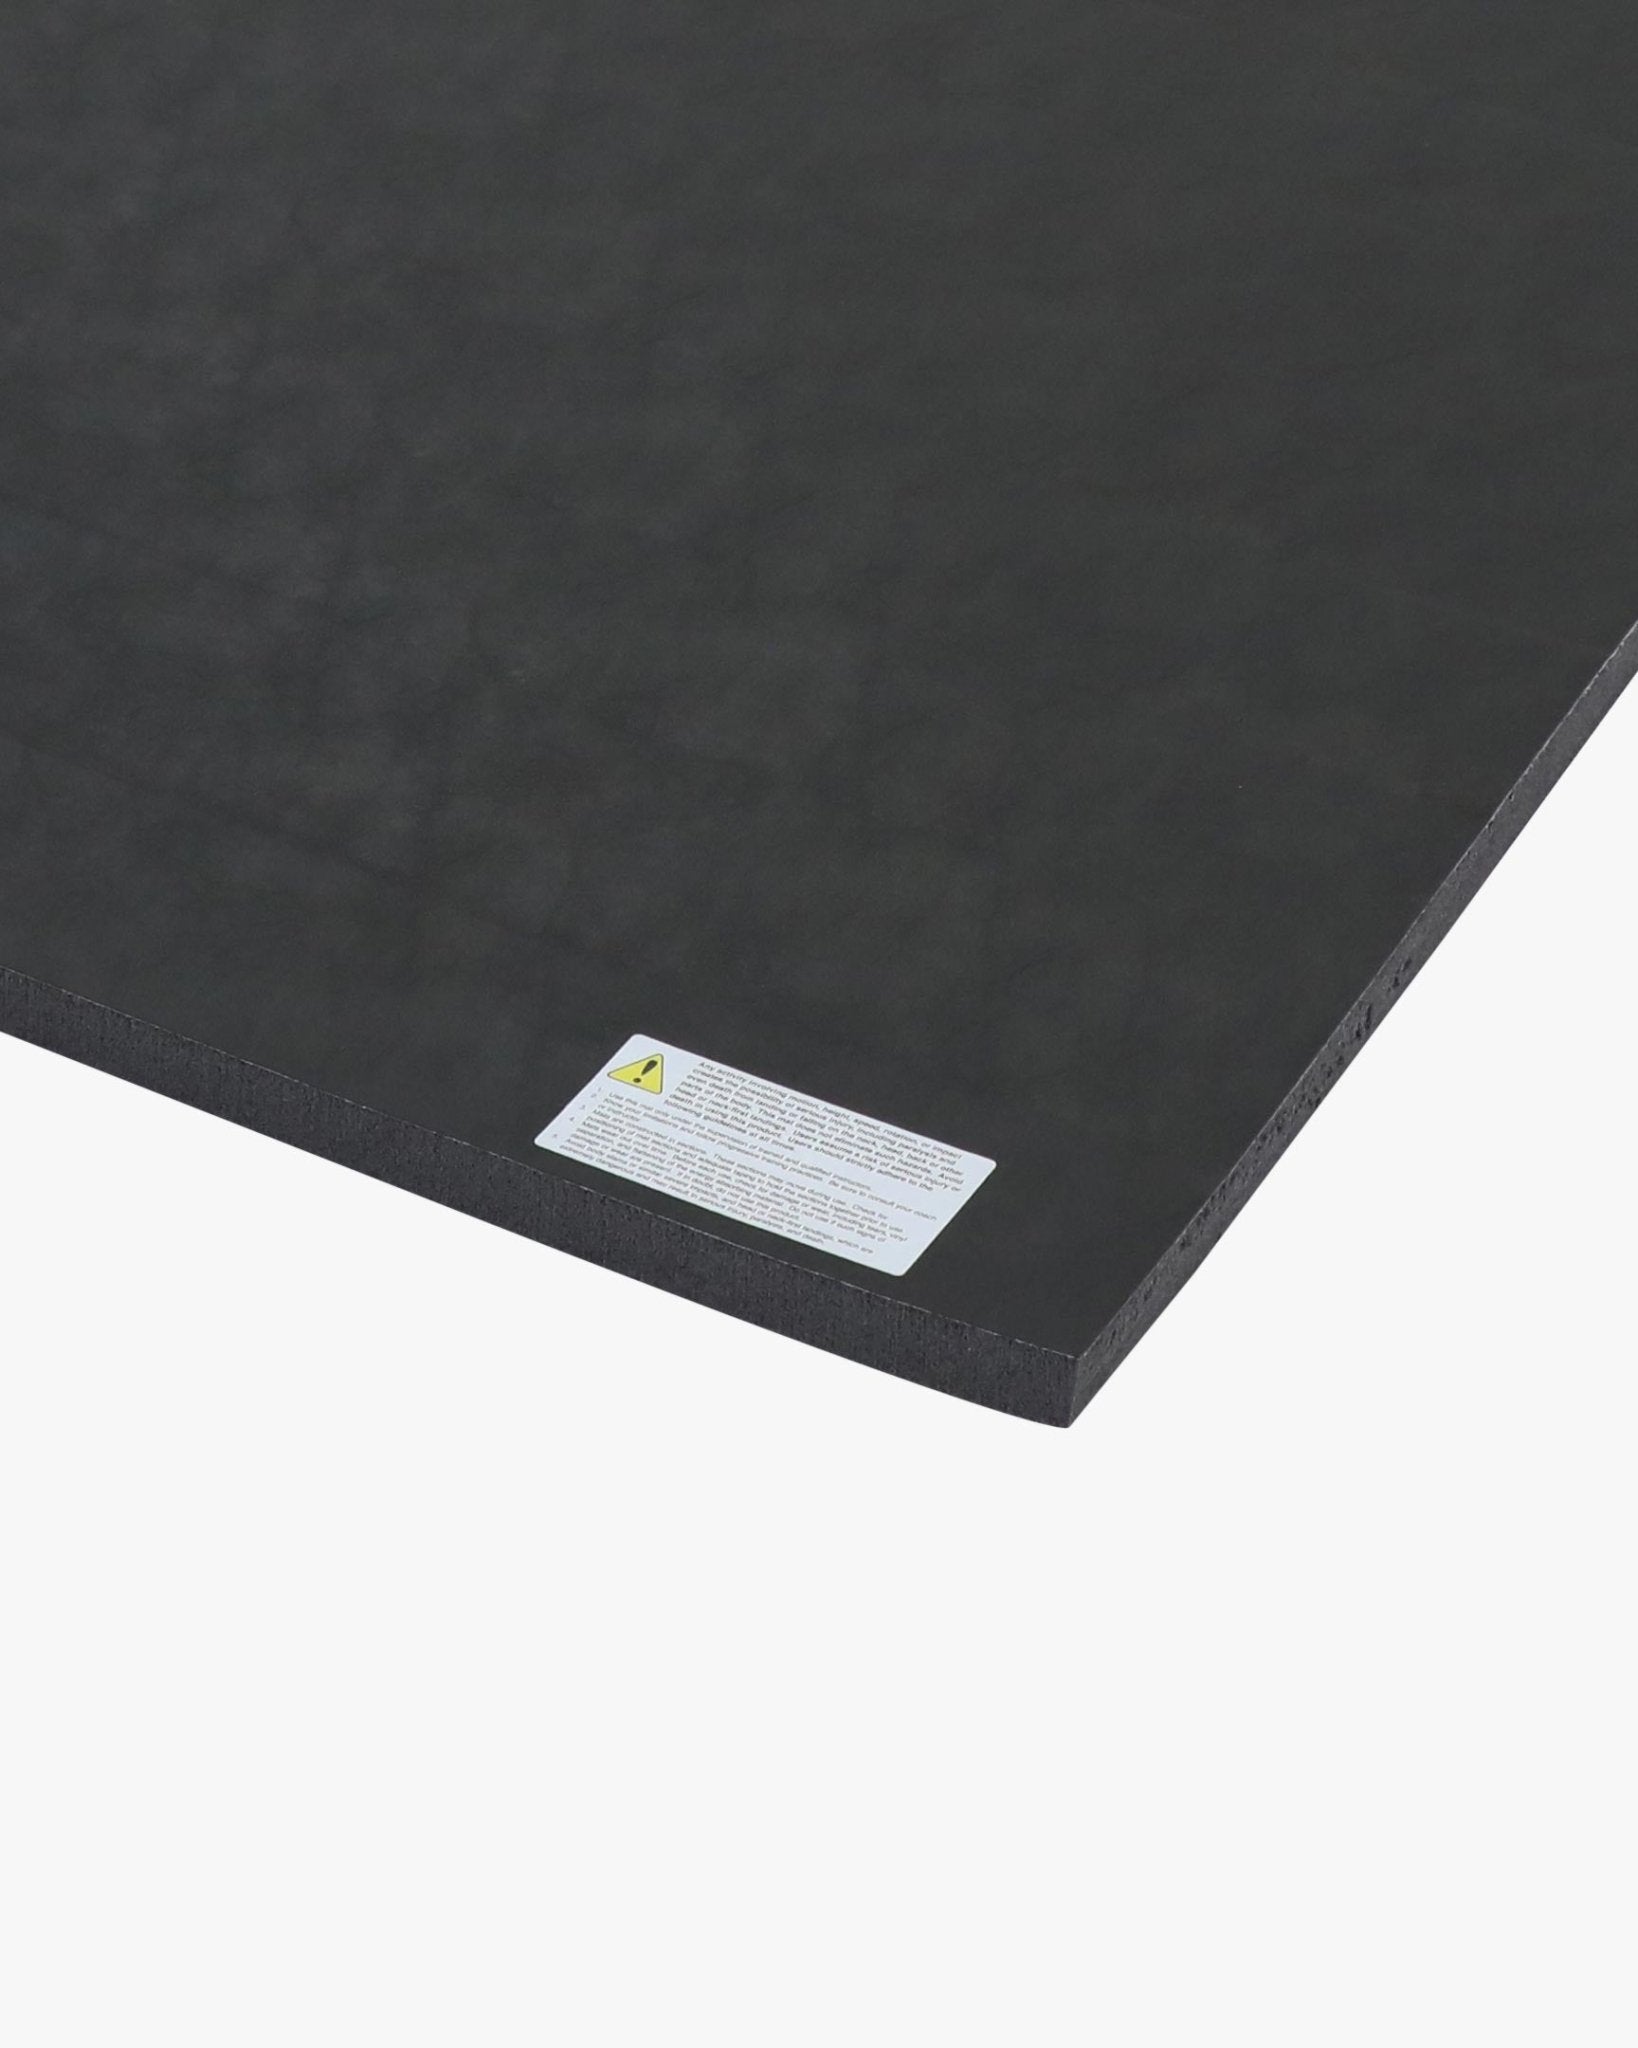 Custom Rollout Mat - 1.25" Thick